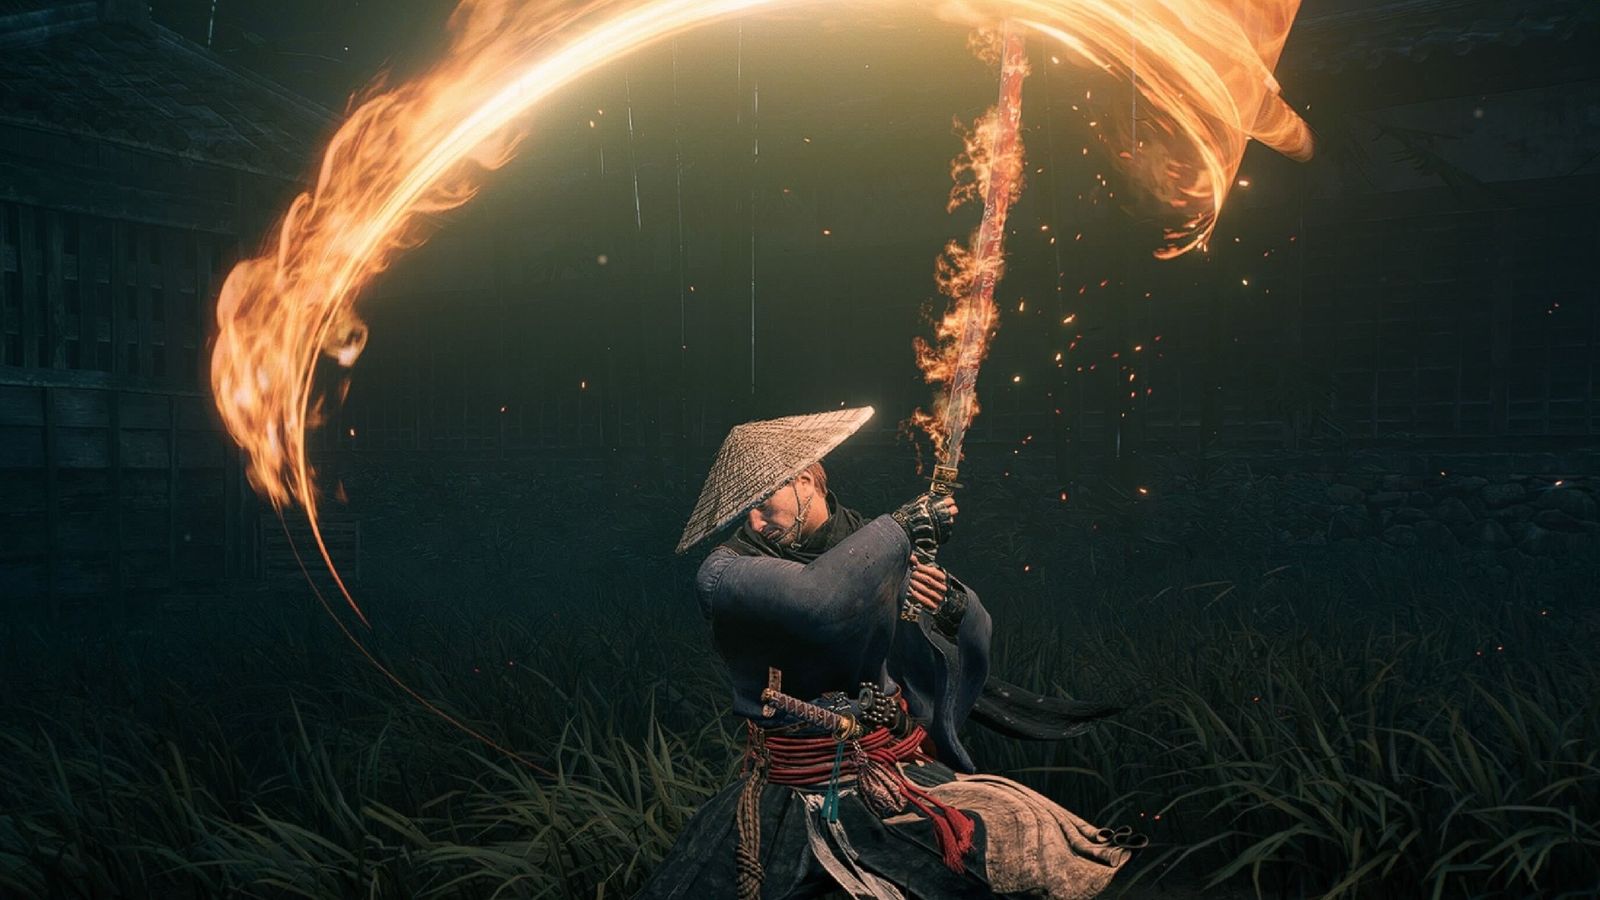 Veiled Edge swinging a flaming sword in Rise of the Ronin game